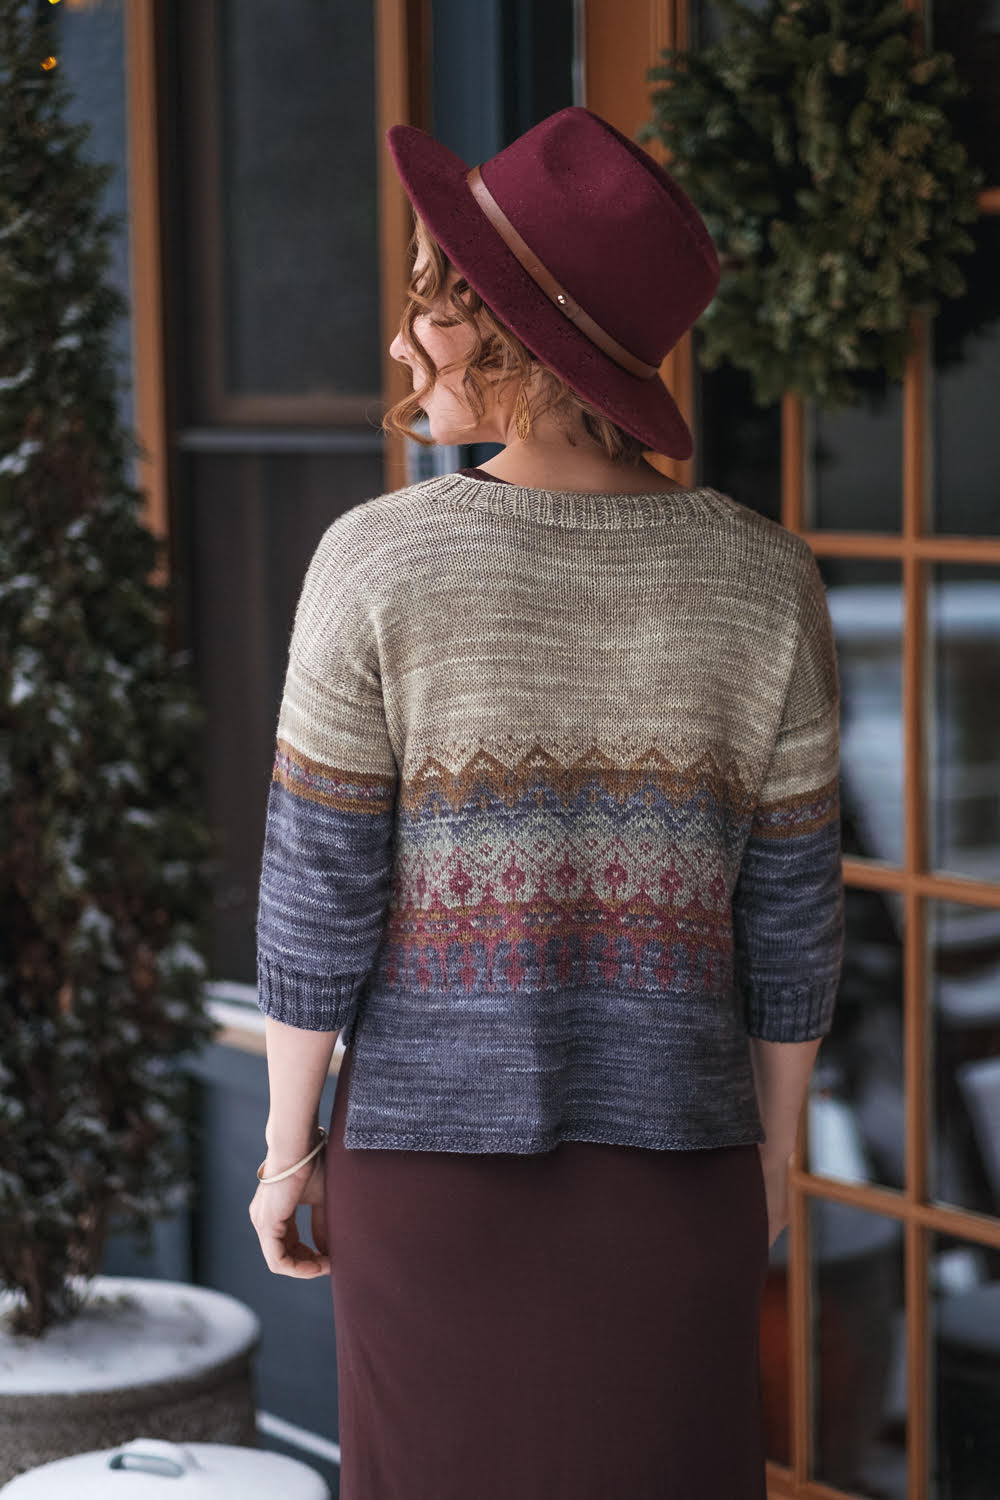 Challenge Yourself by Knitting this Fair Isle Sweater - Solace - Expression  Fiber Arts